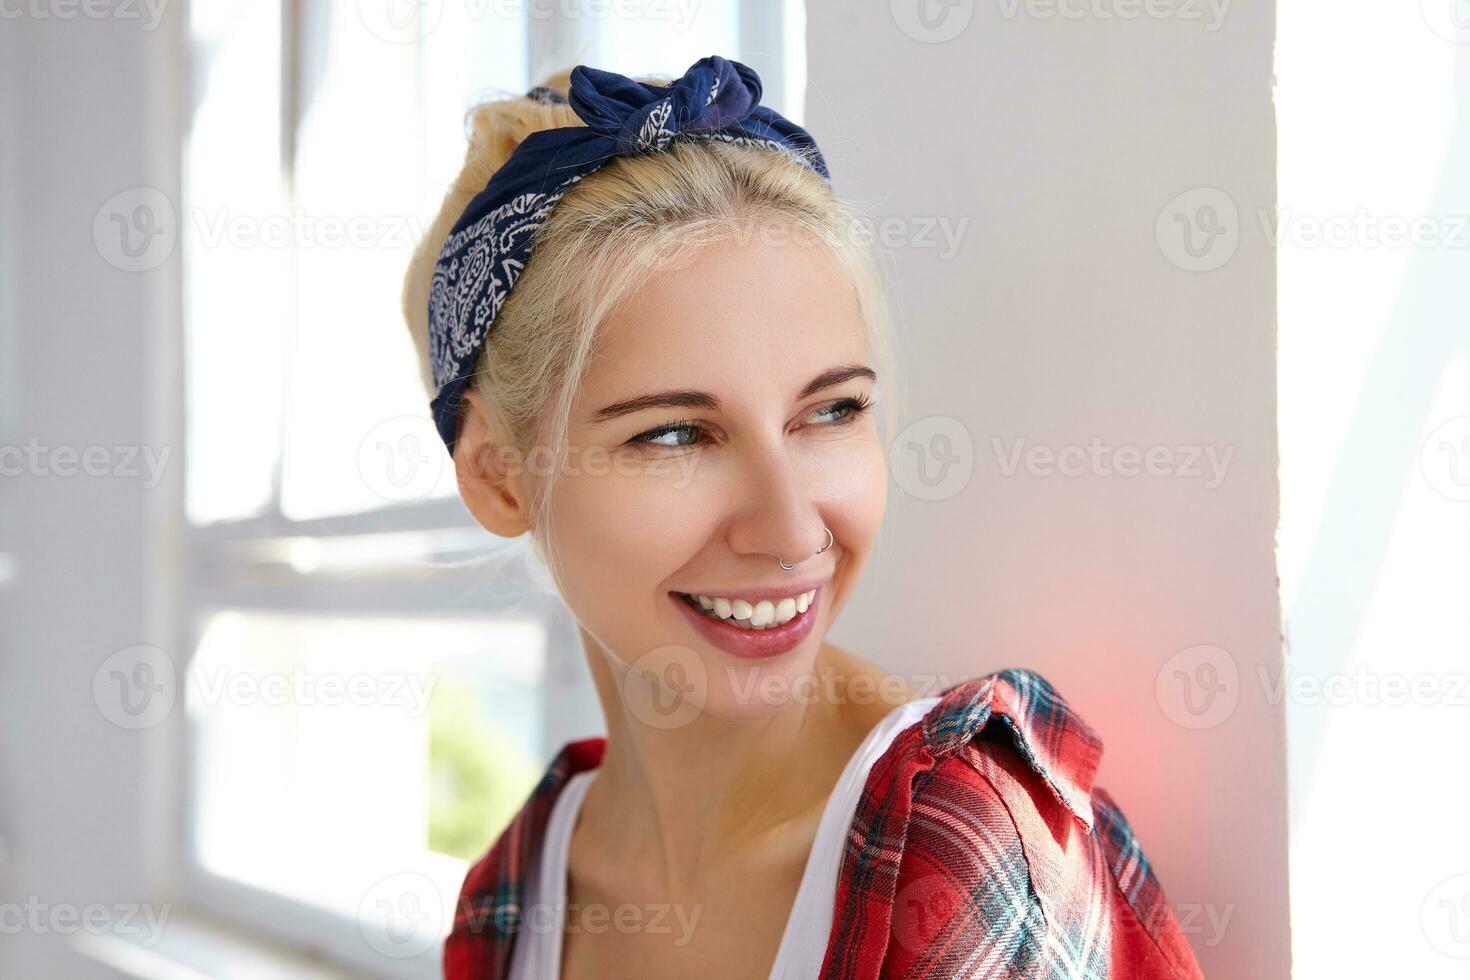 Portrait of young cheerful blonde female with casual hairstyle wearing headband and casual wear while posing over bright studio, smiling widely while looking gladly aside photo